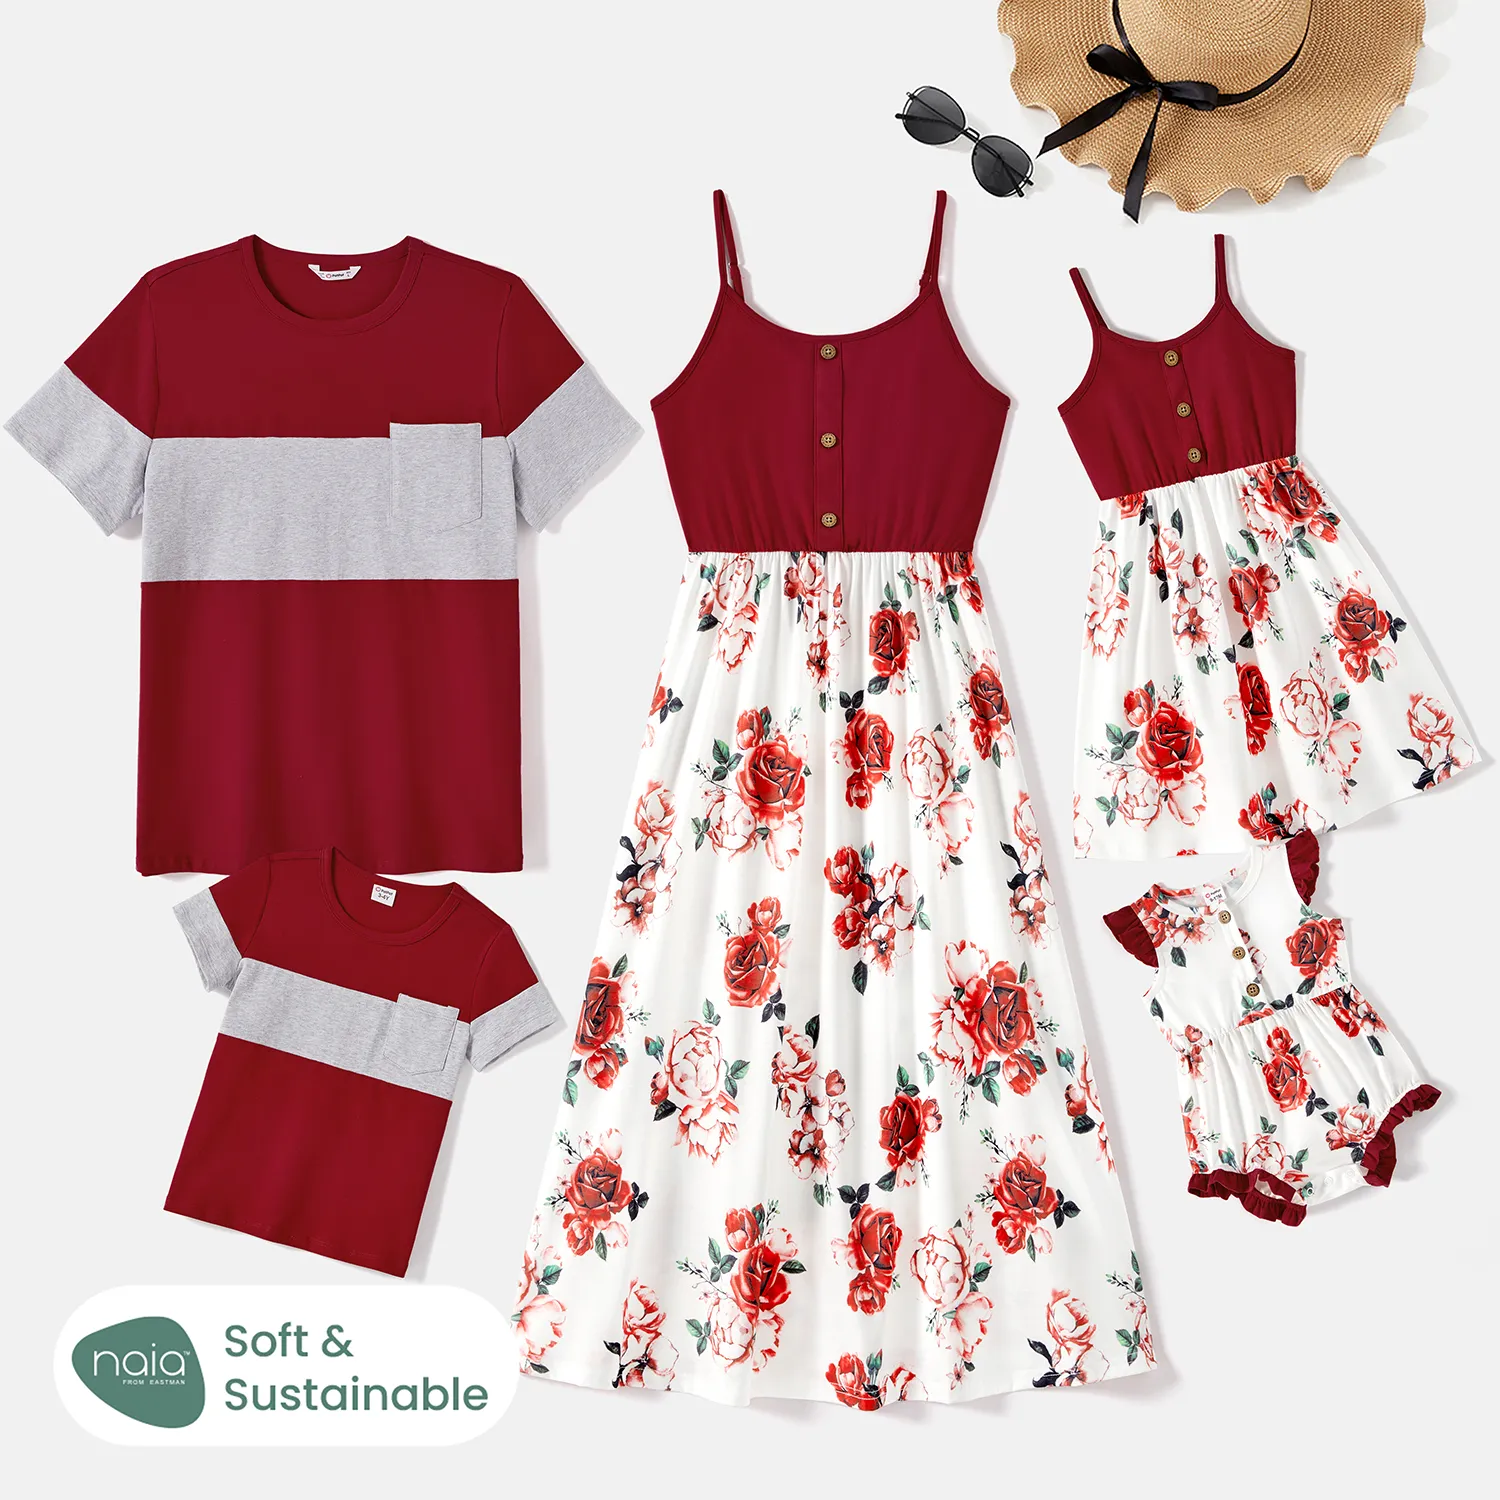 

Family Matching Cotton Short-sleeve Colorblock T-shirts and Floral Print Spliced Naia™ Cami Dresses Sets